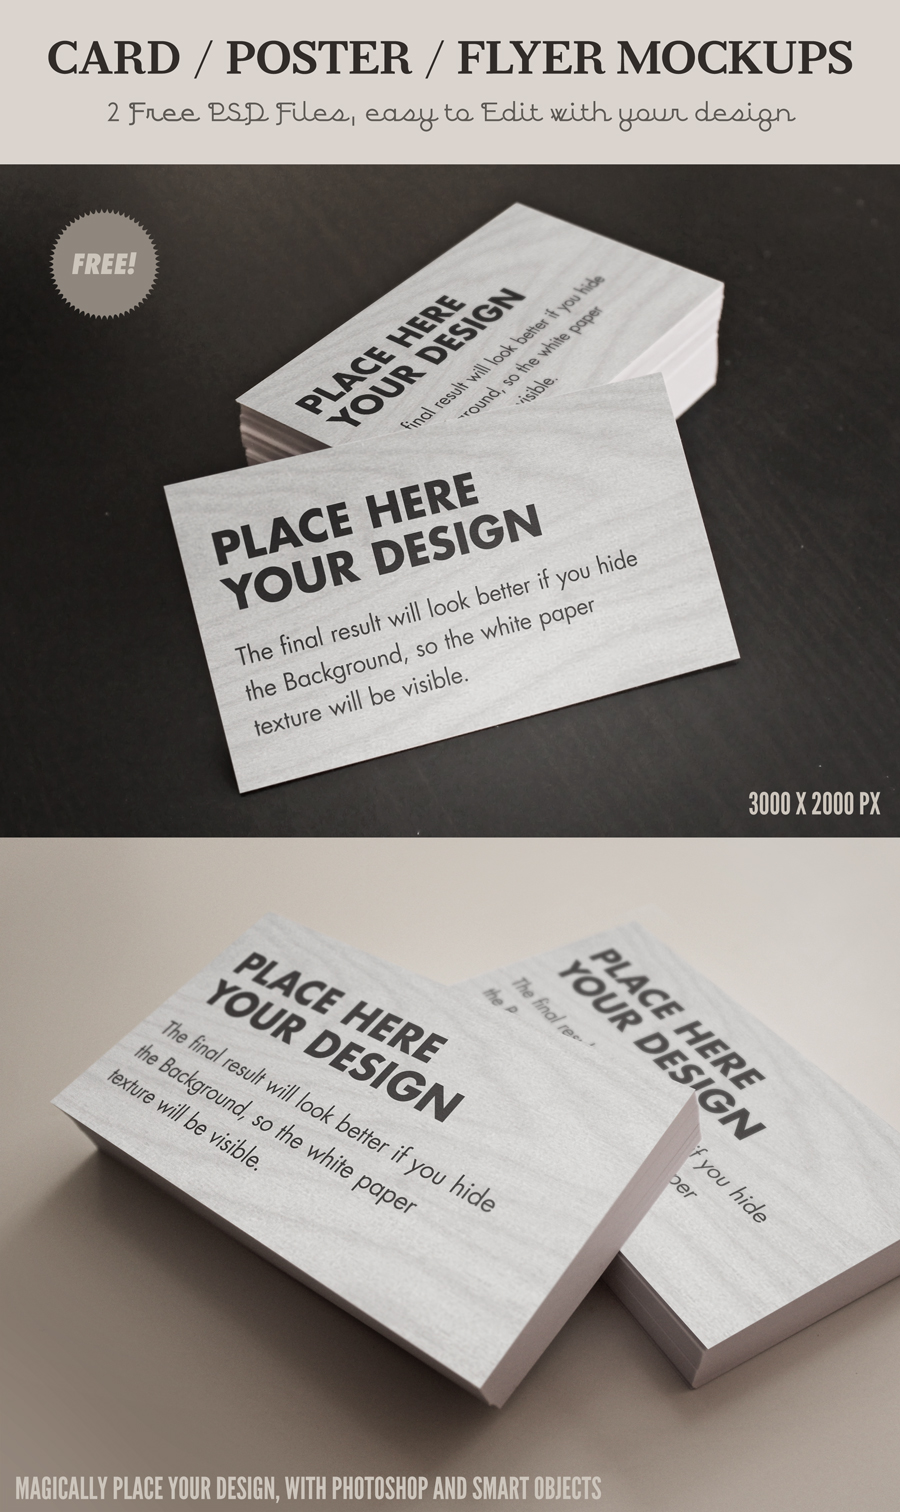 Free Card / Flyer mock-ups - Psd files in high res